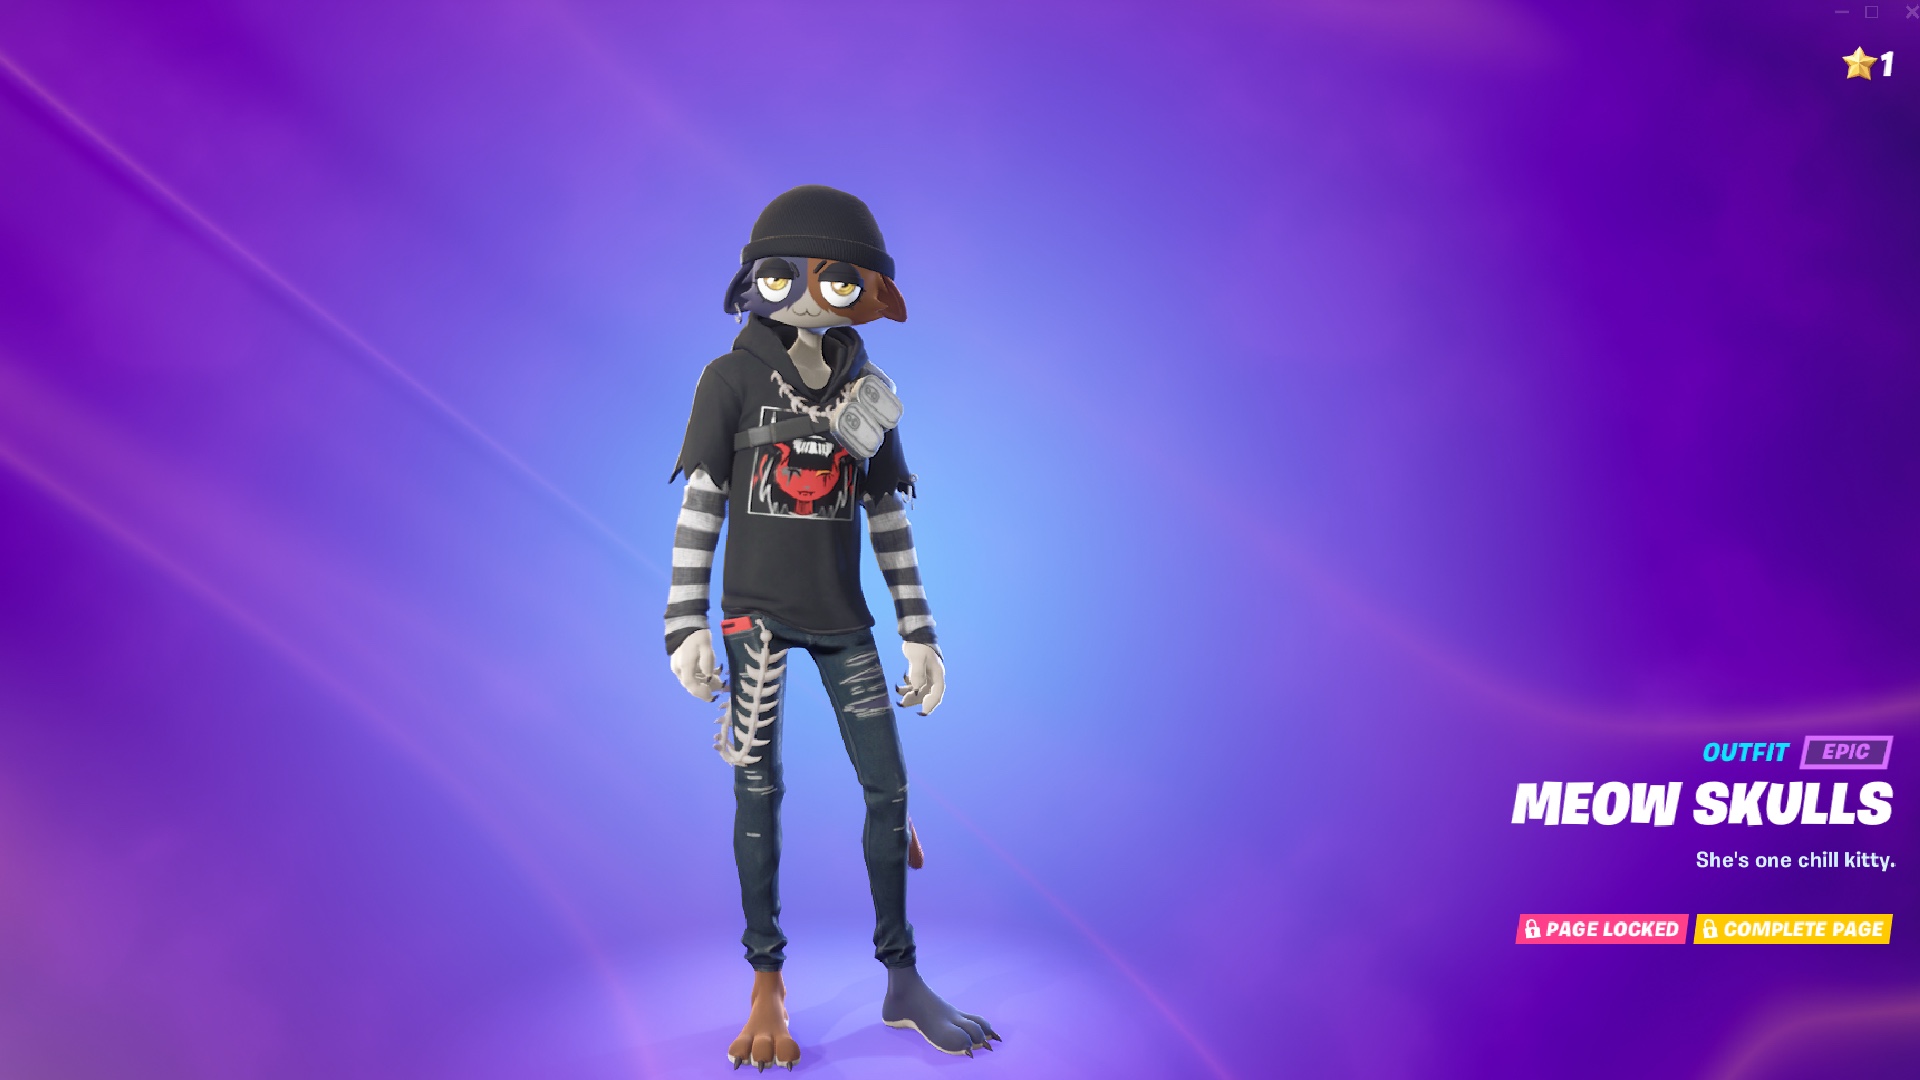 Meow Skulls is a new character in Fortnite Chapter 3 Season 4